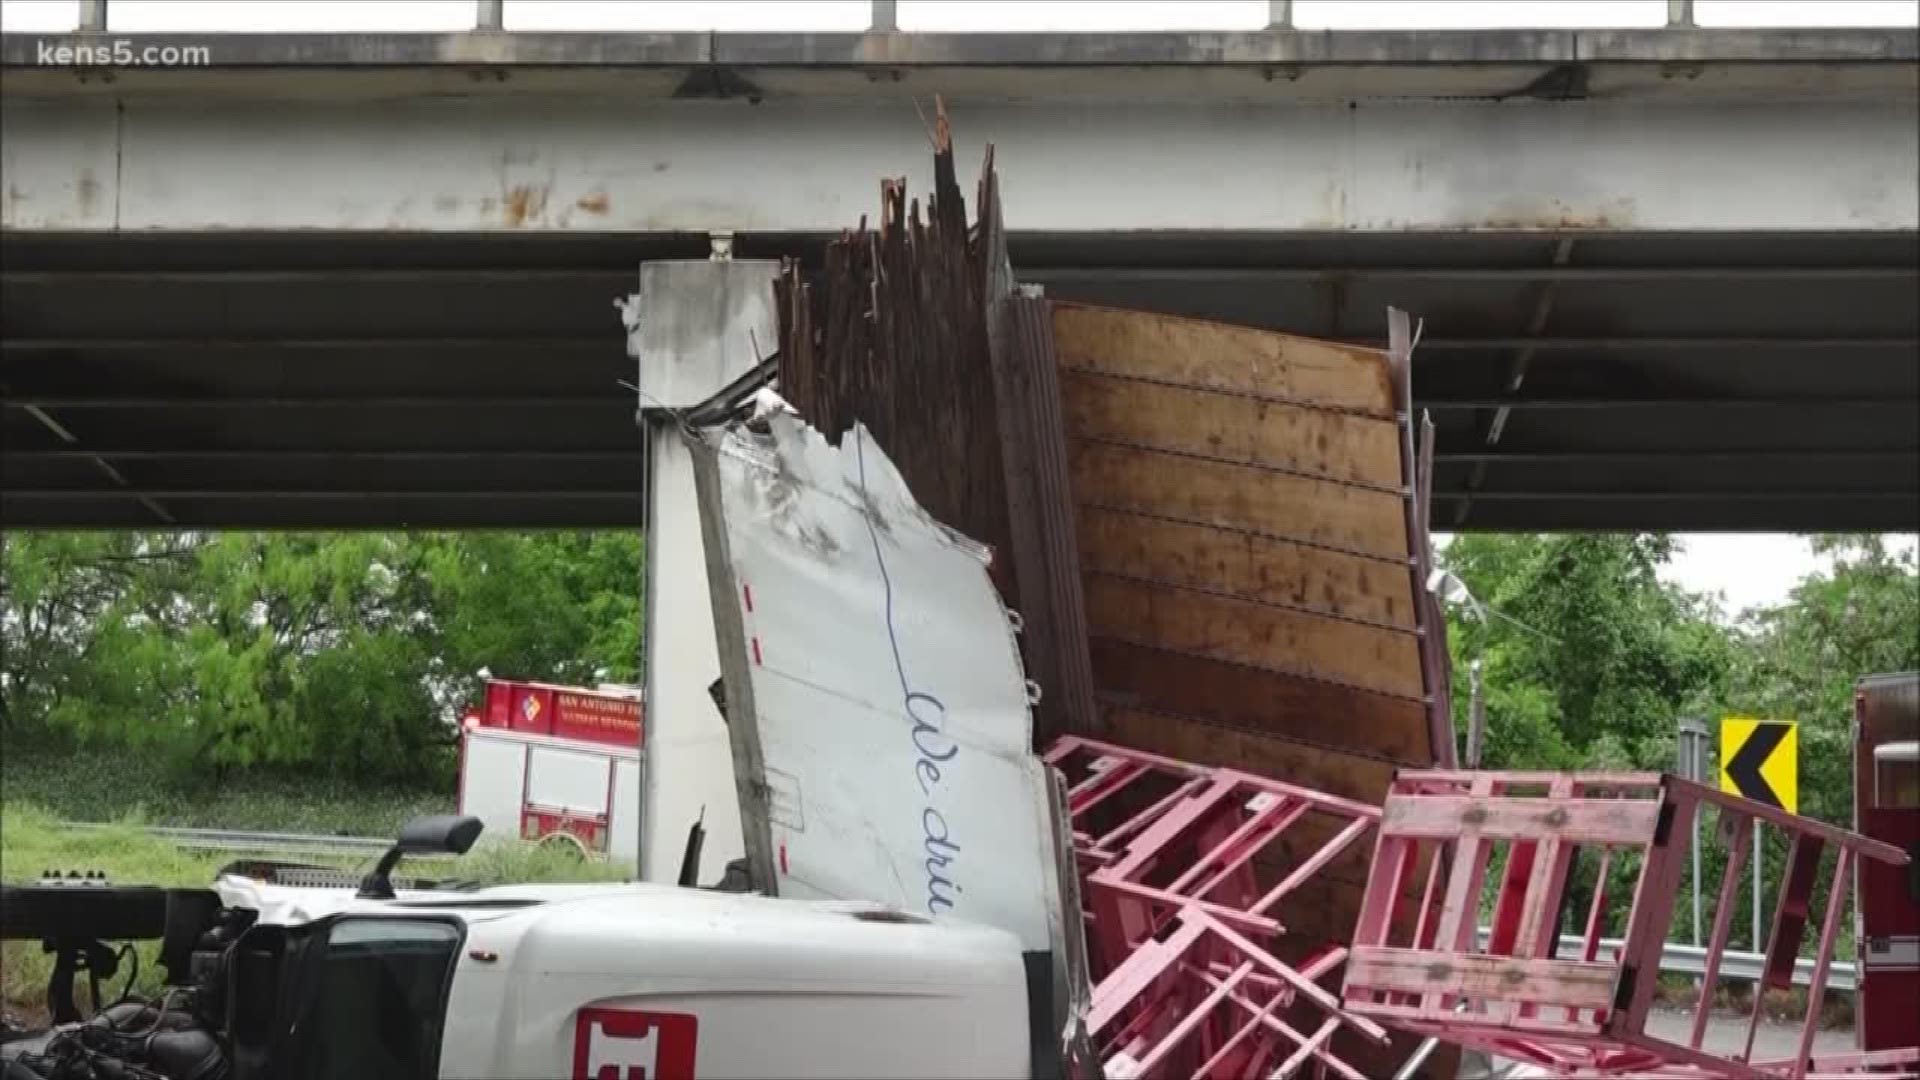 Severe weather ripped through the San Antonio area Sunday morning, leaving some damage behind. One of the biggest problems - a big rig demolished after flying off a bridge. Amazingly, the driver walked away.